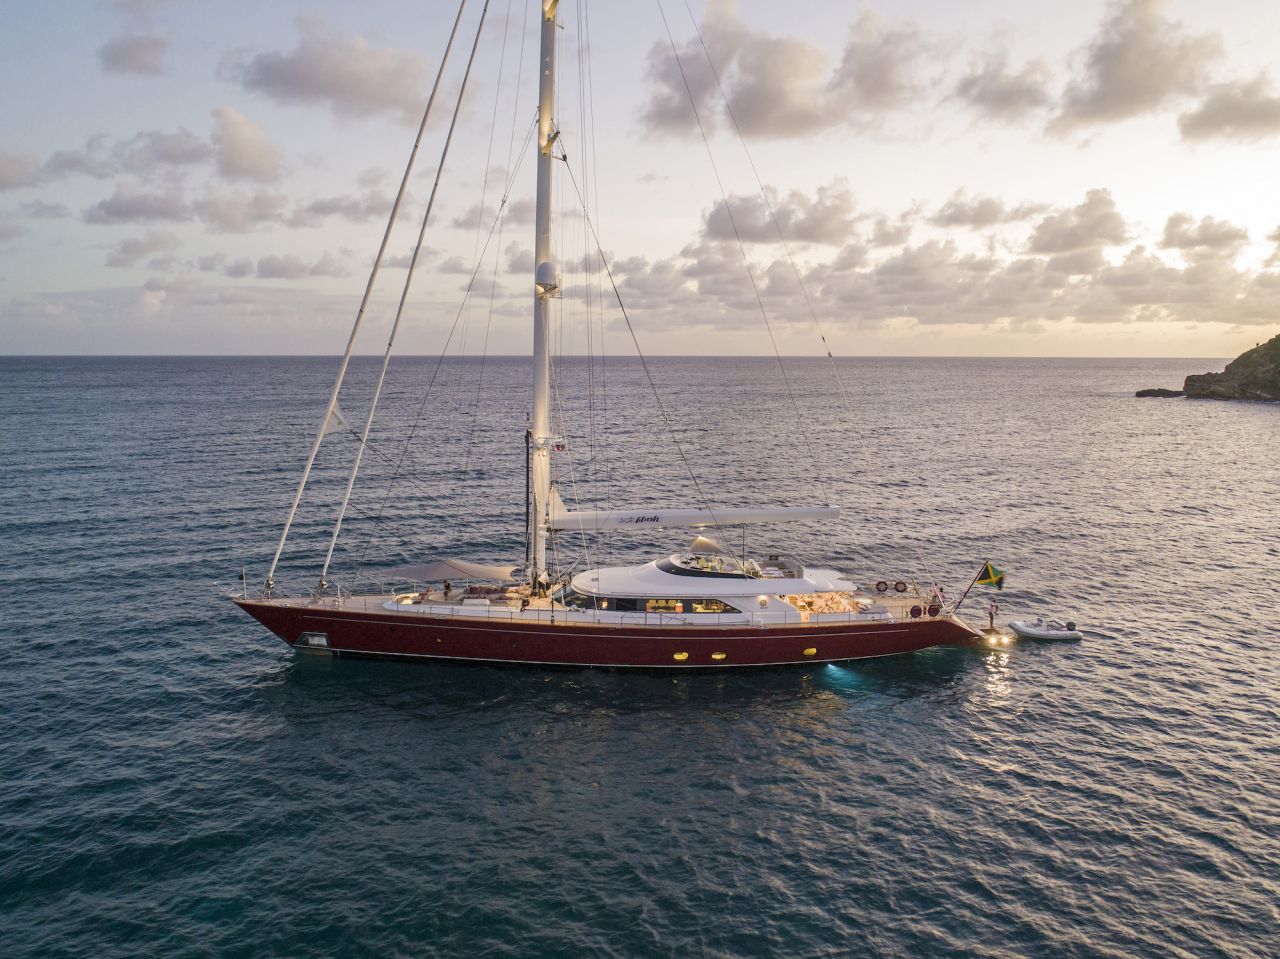 Classic sailing yacht Blush, seen taking to the waters of Antigua, is currently up for sale.